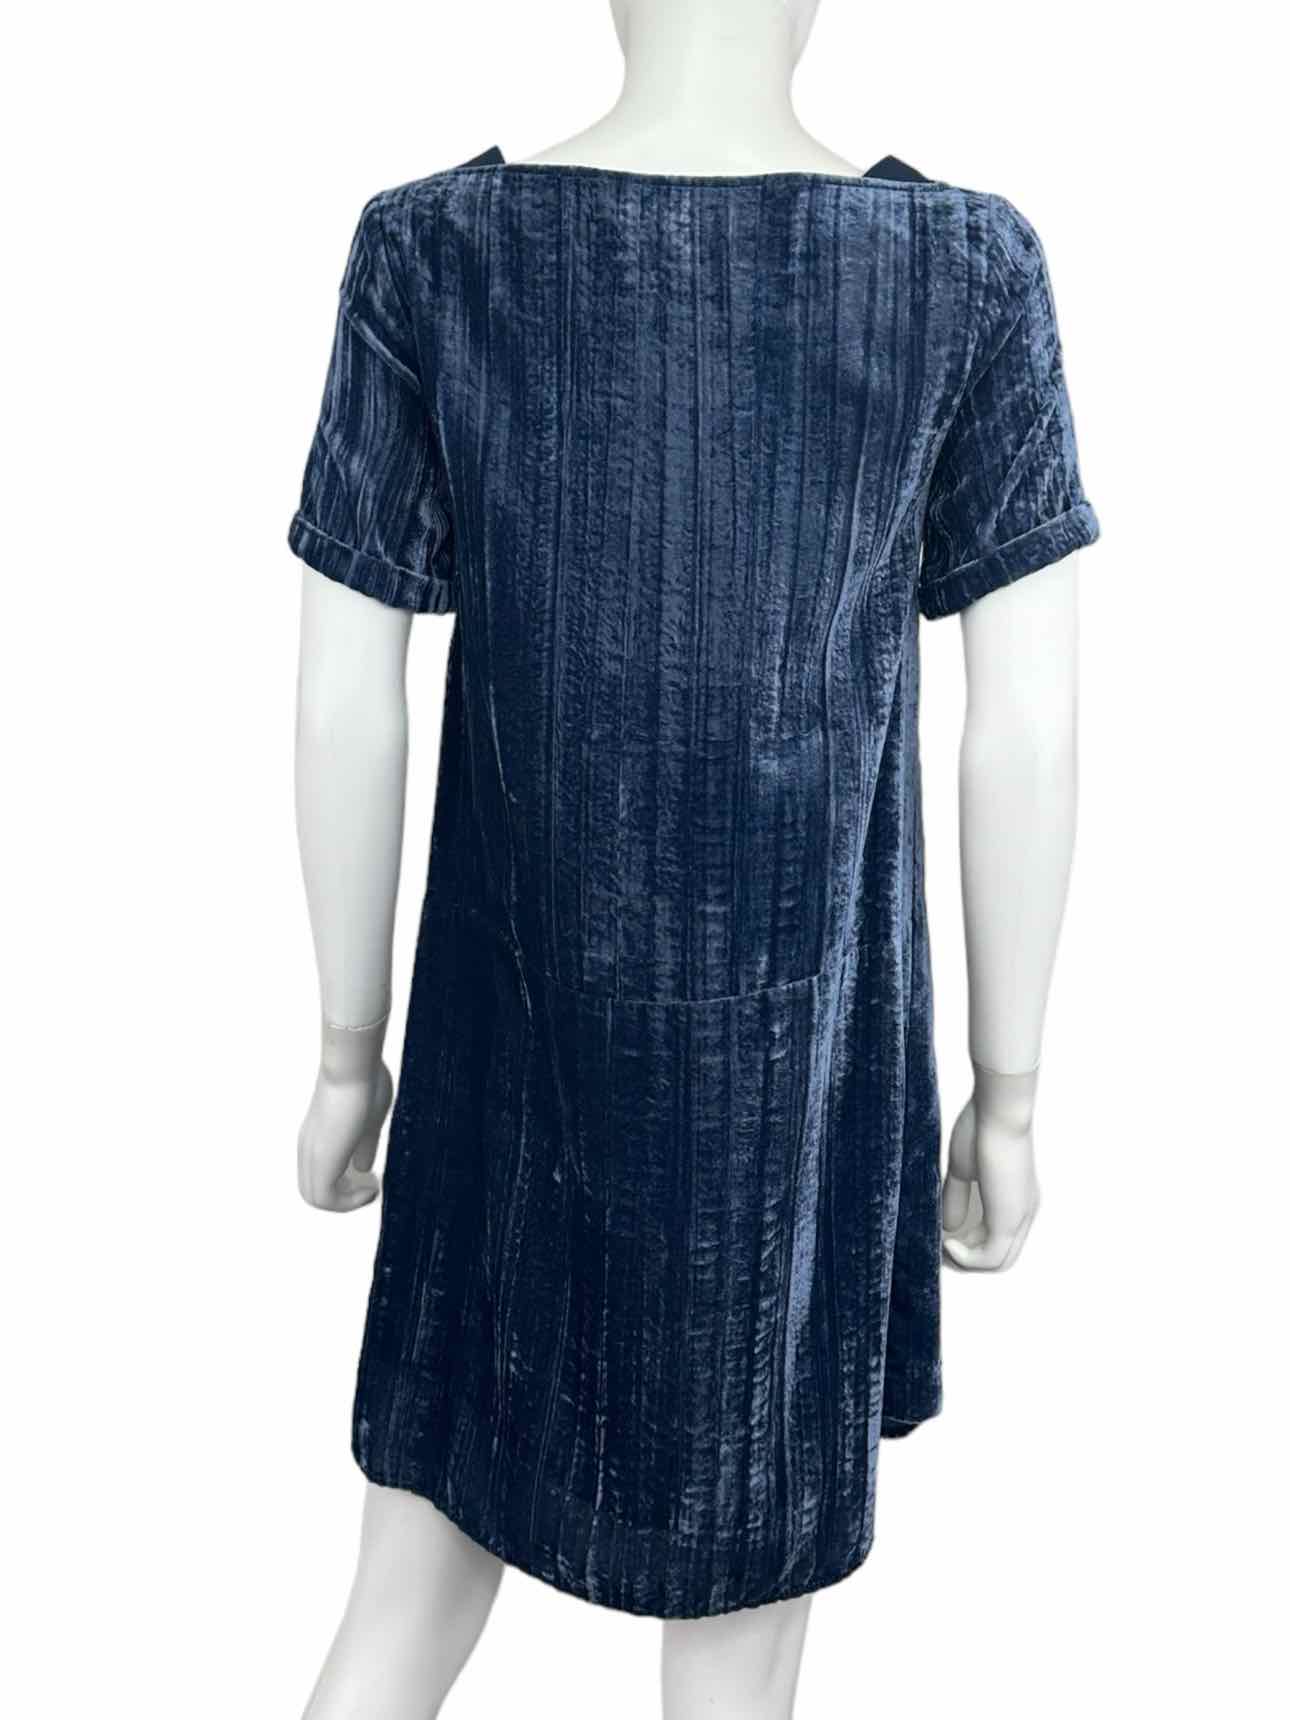 floreat by Anthropologie Blue Crushed Velvet Dress Size XS